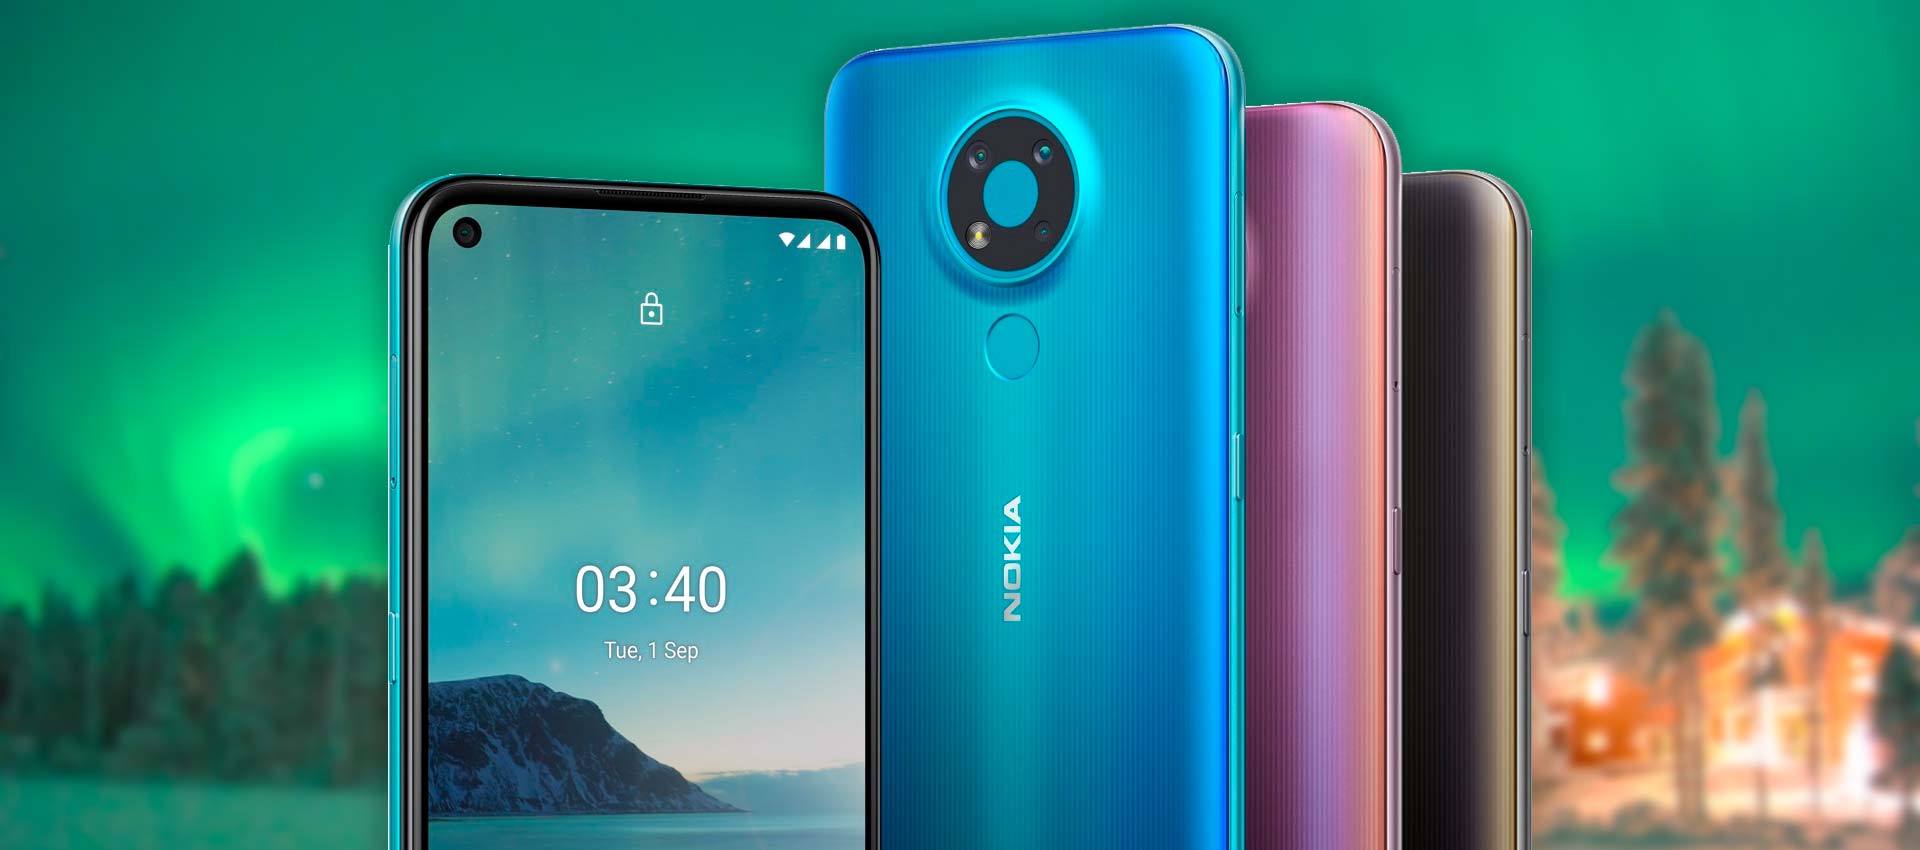 Nokia 3.4 Launched in Pakistan - A Quick Review